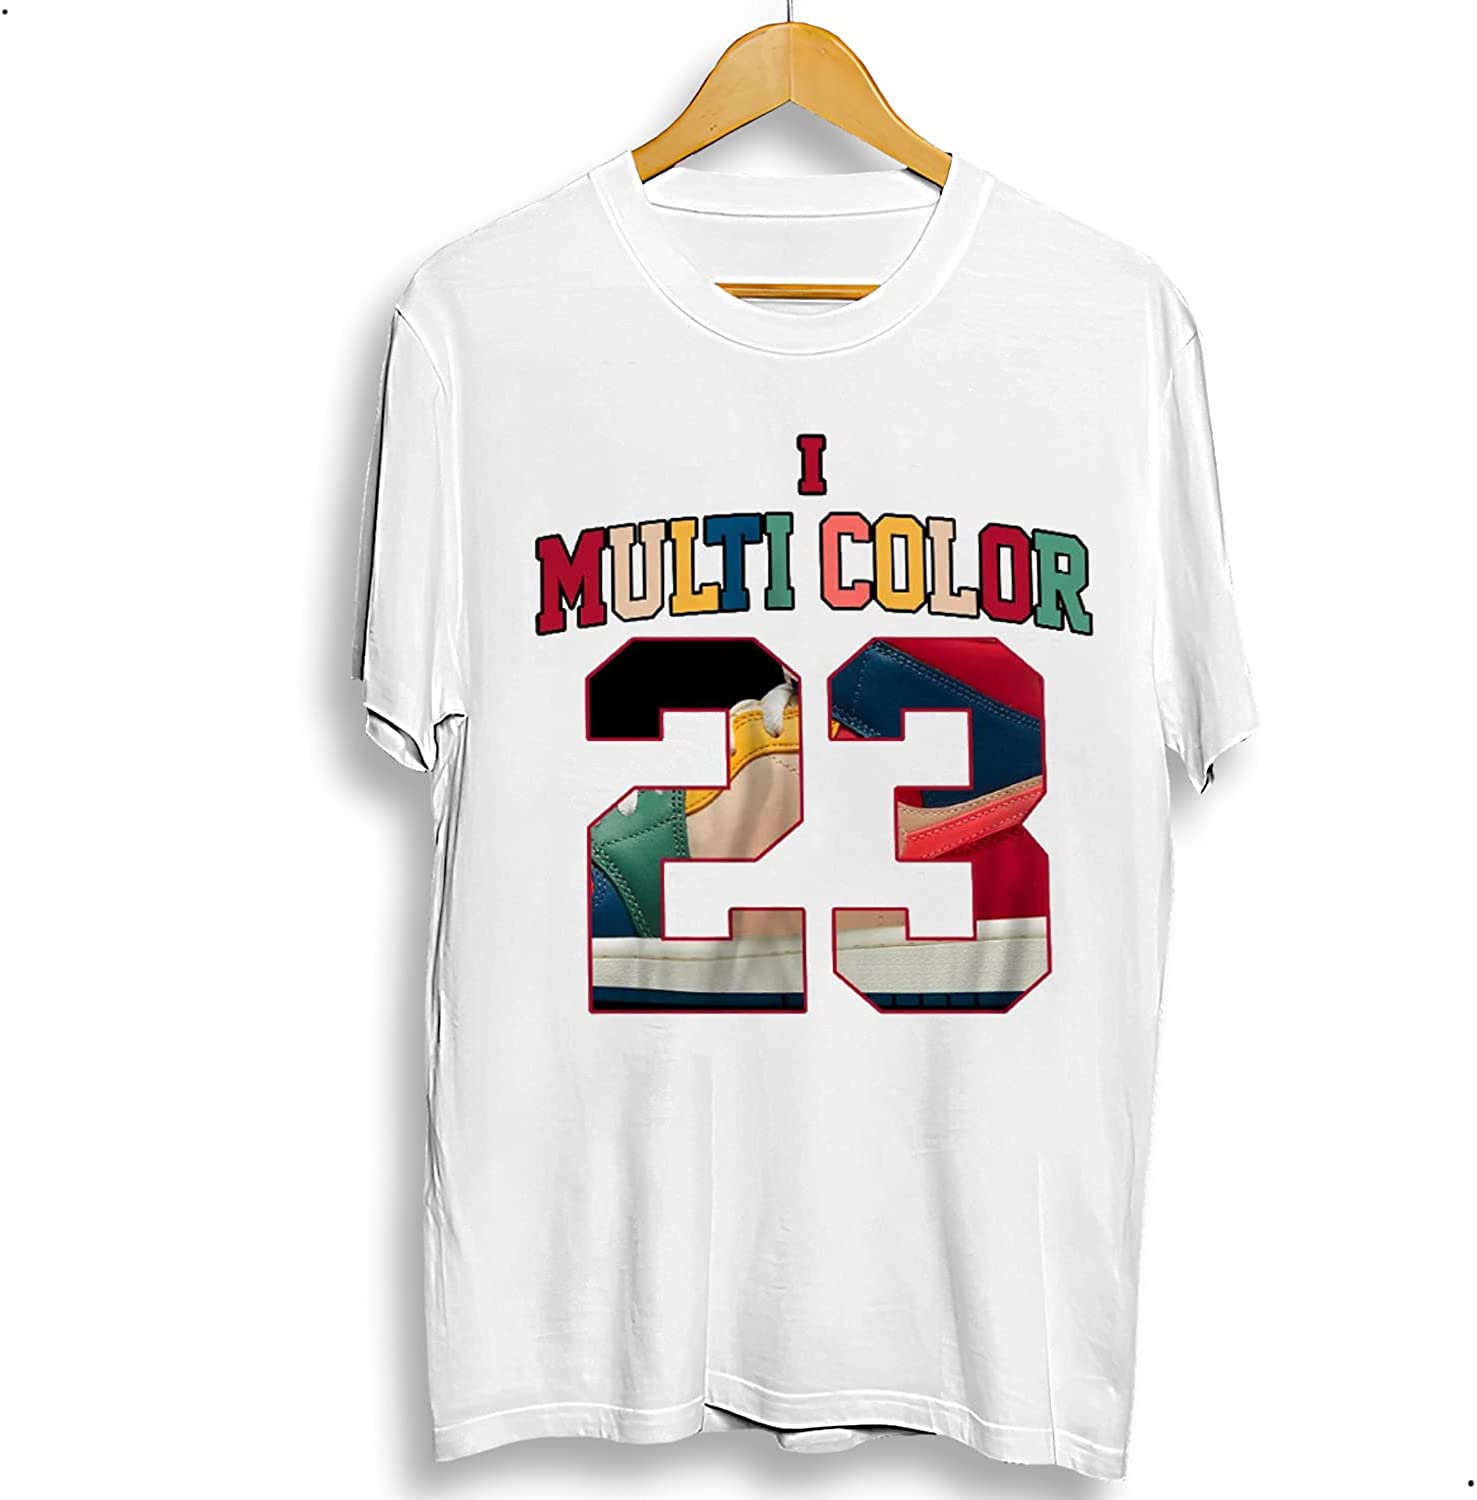 Number 23 G.o.a.t Shoes T Shirts to Match J0rdan 1 Mid Multi Color 2022, Matching for Sneaker J0rdan 1 Mid Multi Color 2022, Shirts for Sneaker J0rdan 1 Mid Multi Color 2022 Gift for Men Women – JOT030